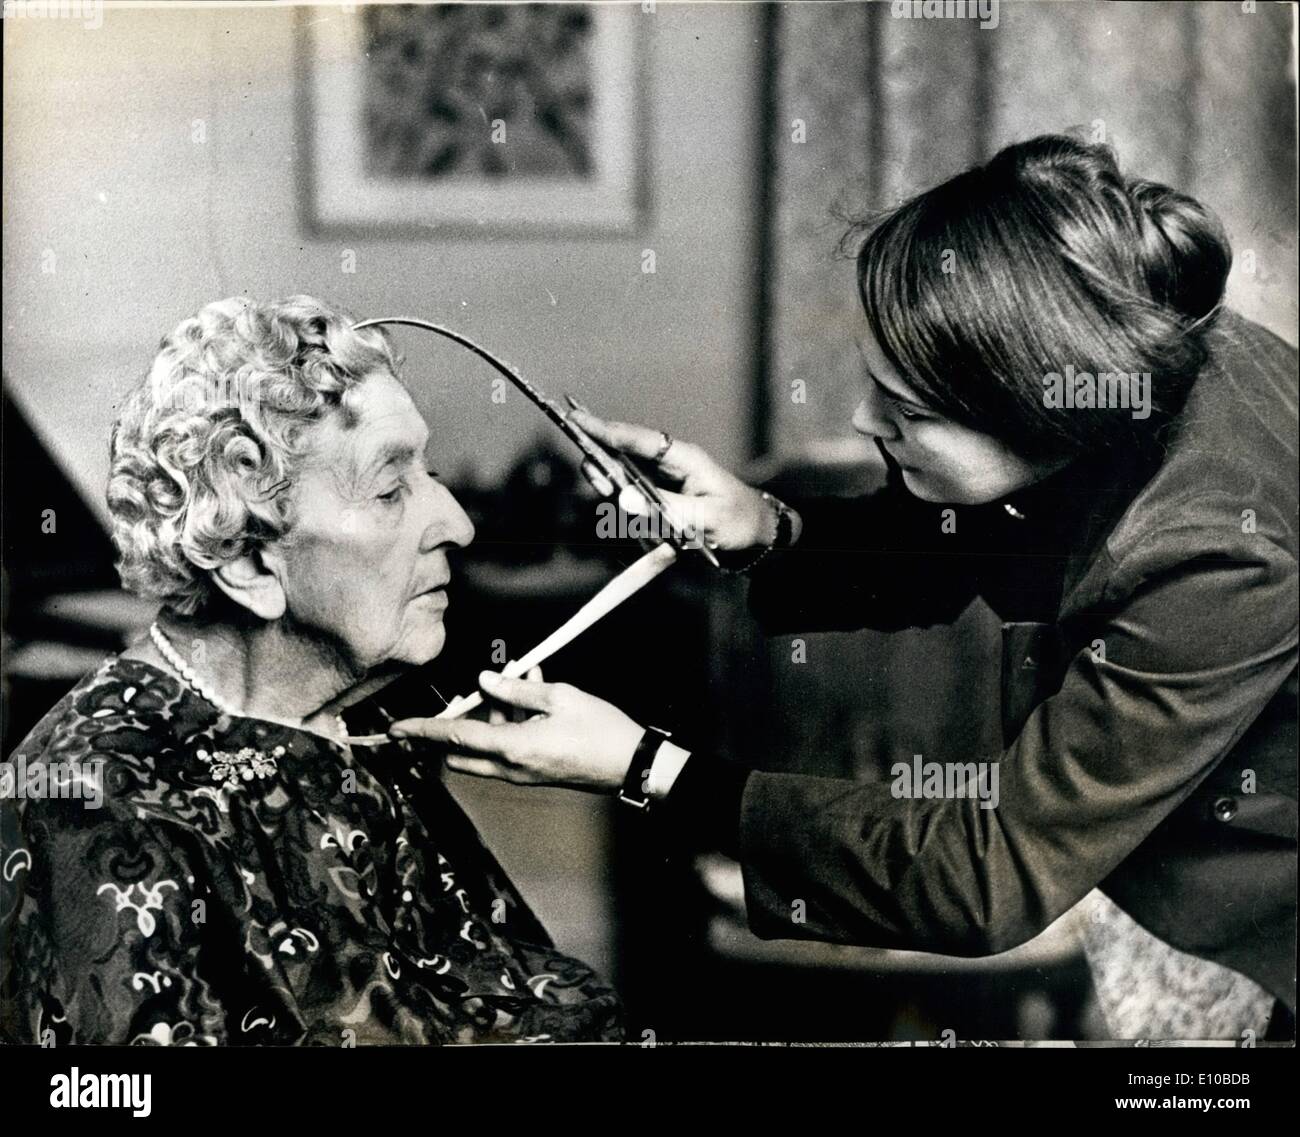 Mar. 03, 1972 - Agatha Christie for madame Tussaud's: photo shows Madame Tussaud's sculptor Lyn Kramer takes caliper measurements at a recent interview with Agatha Christine at her home in Berkshire. Her wax portrait will take its place in the new Grand Hall at Madama Tussaud's later this year. Stock Photo